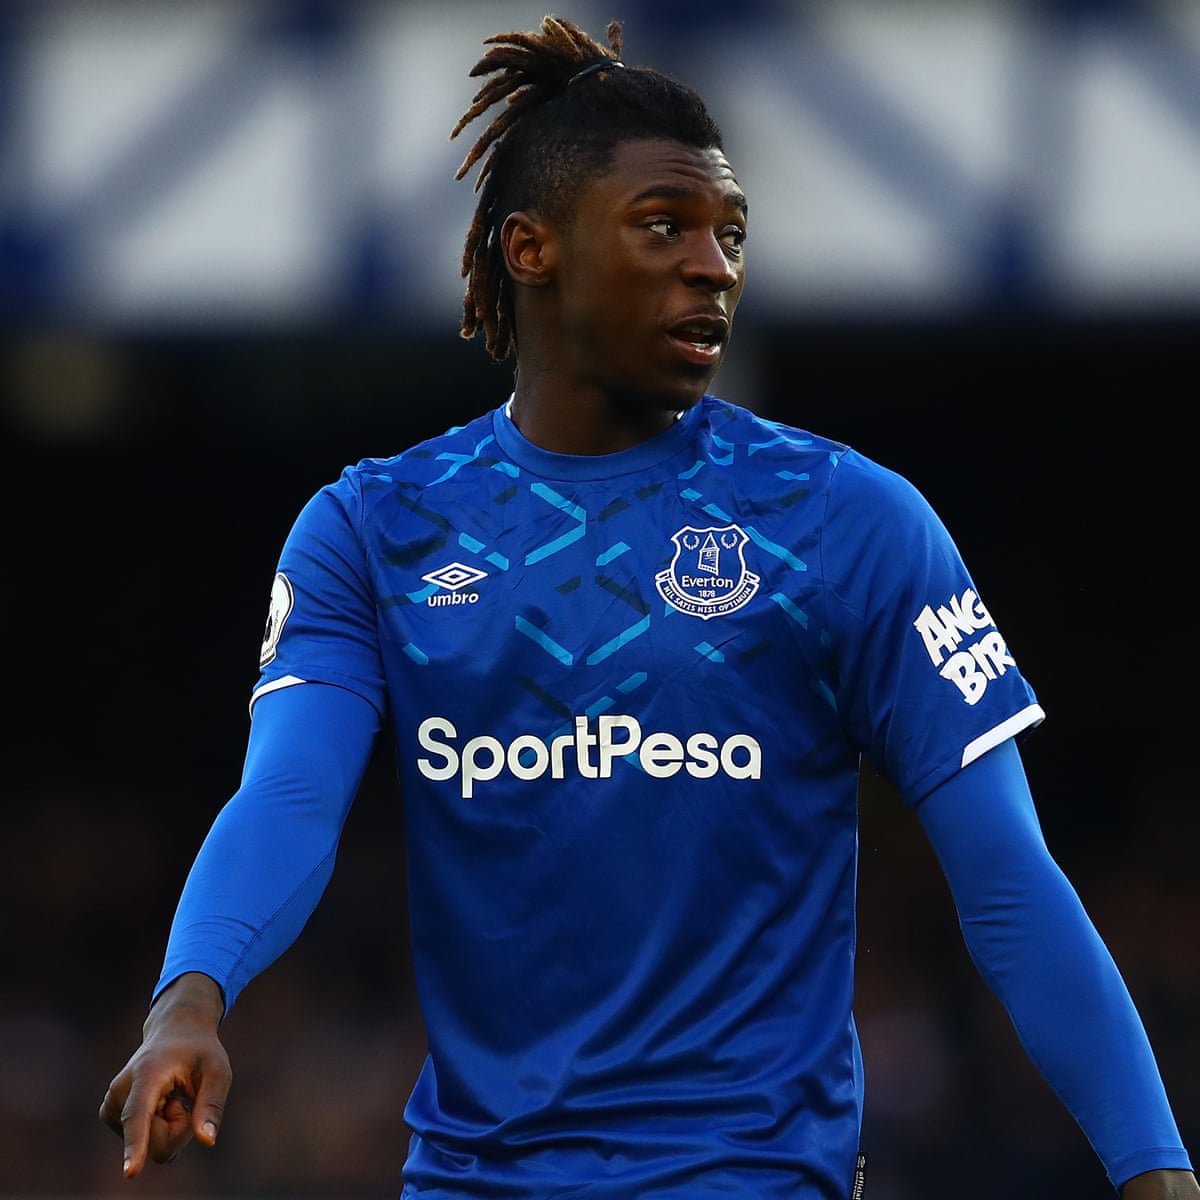 Carlo Ancelotti backs Moise Kean to adapt and succeed at Everton | Football | The Guardian